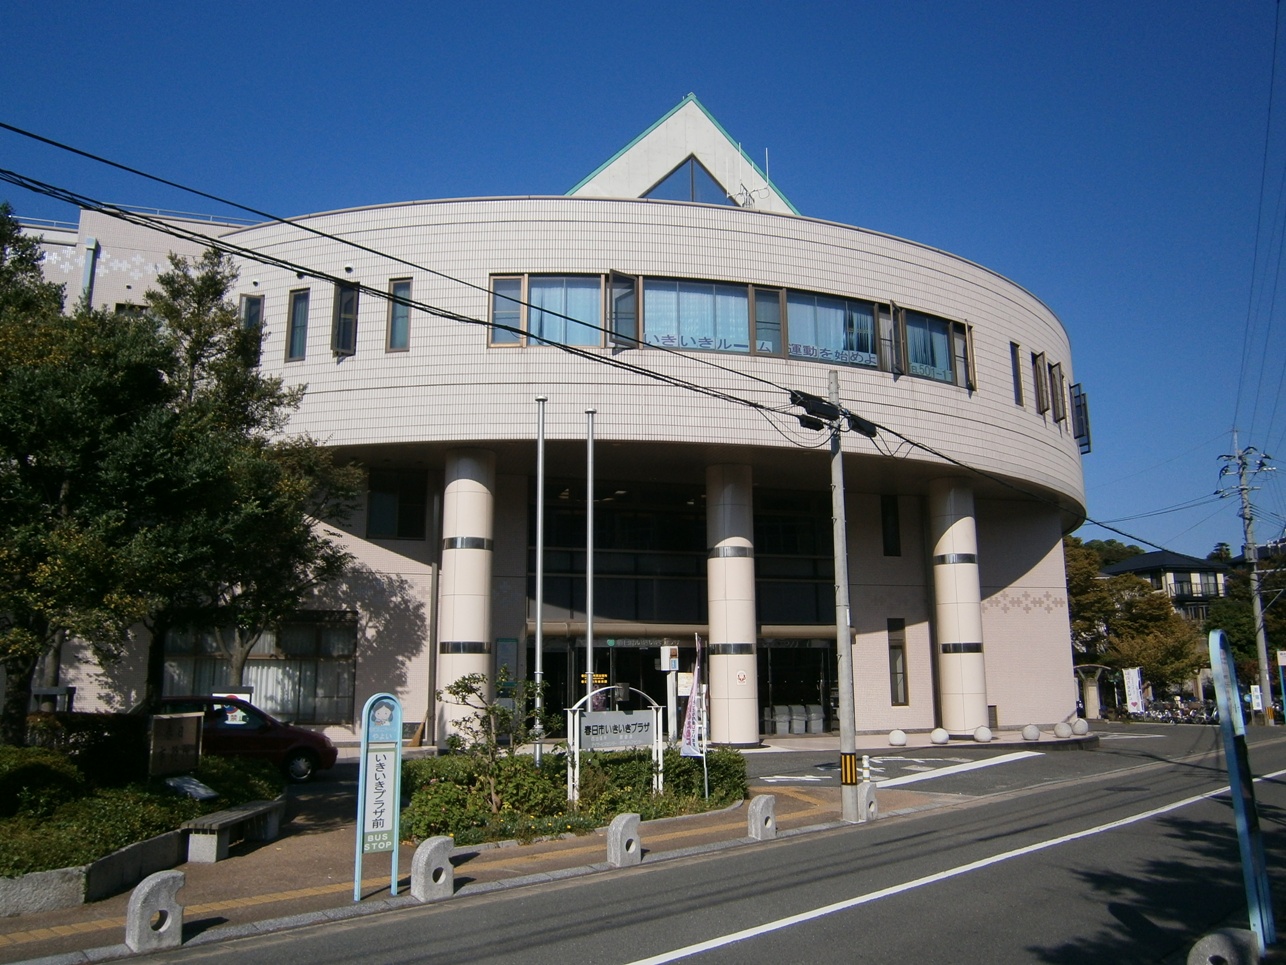 Government office. 340m lively until the Plaza (government office) Kasuga